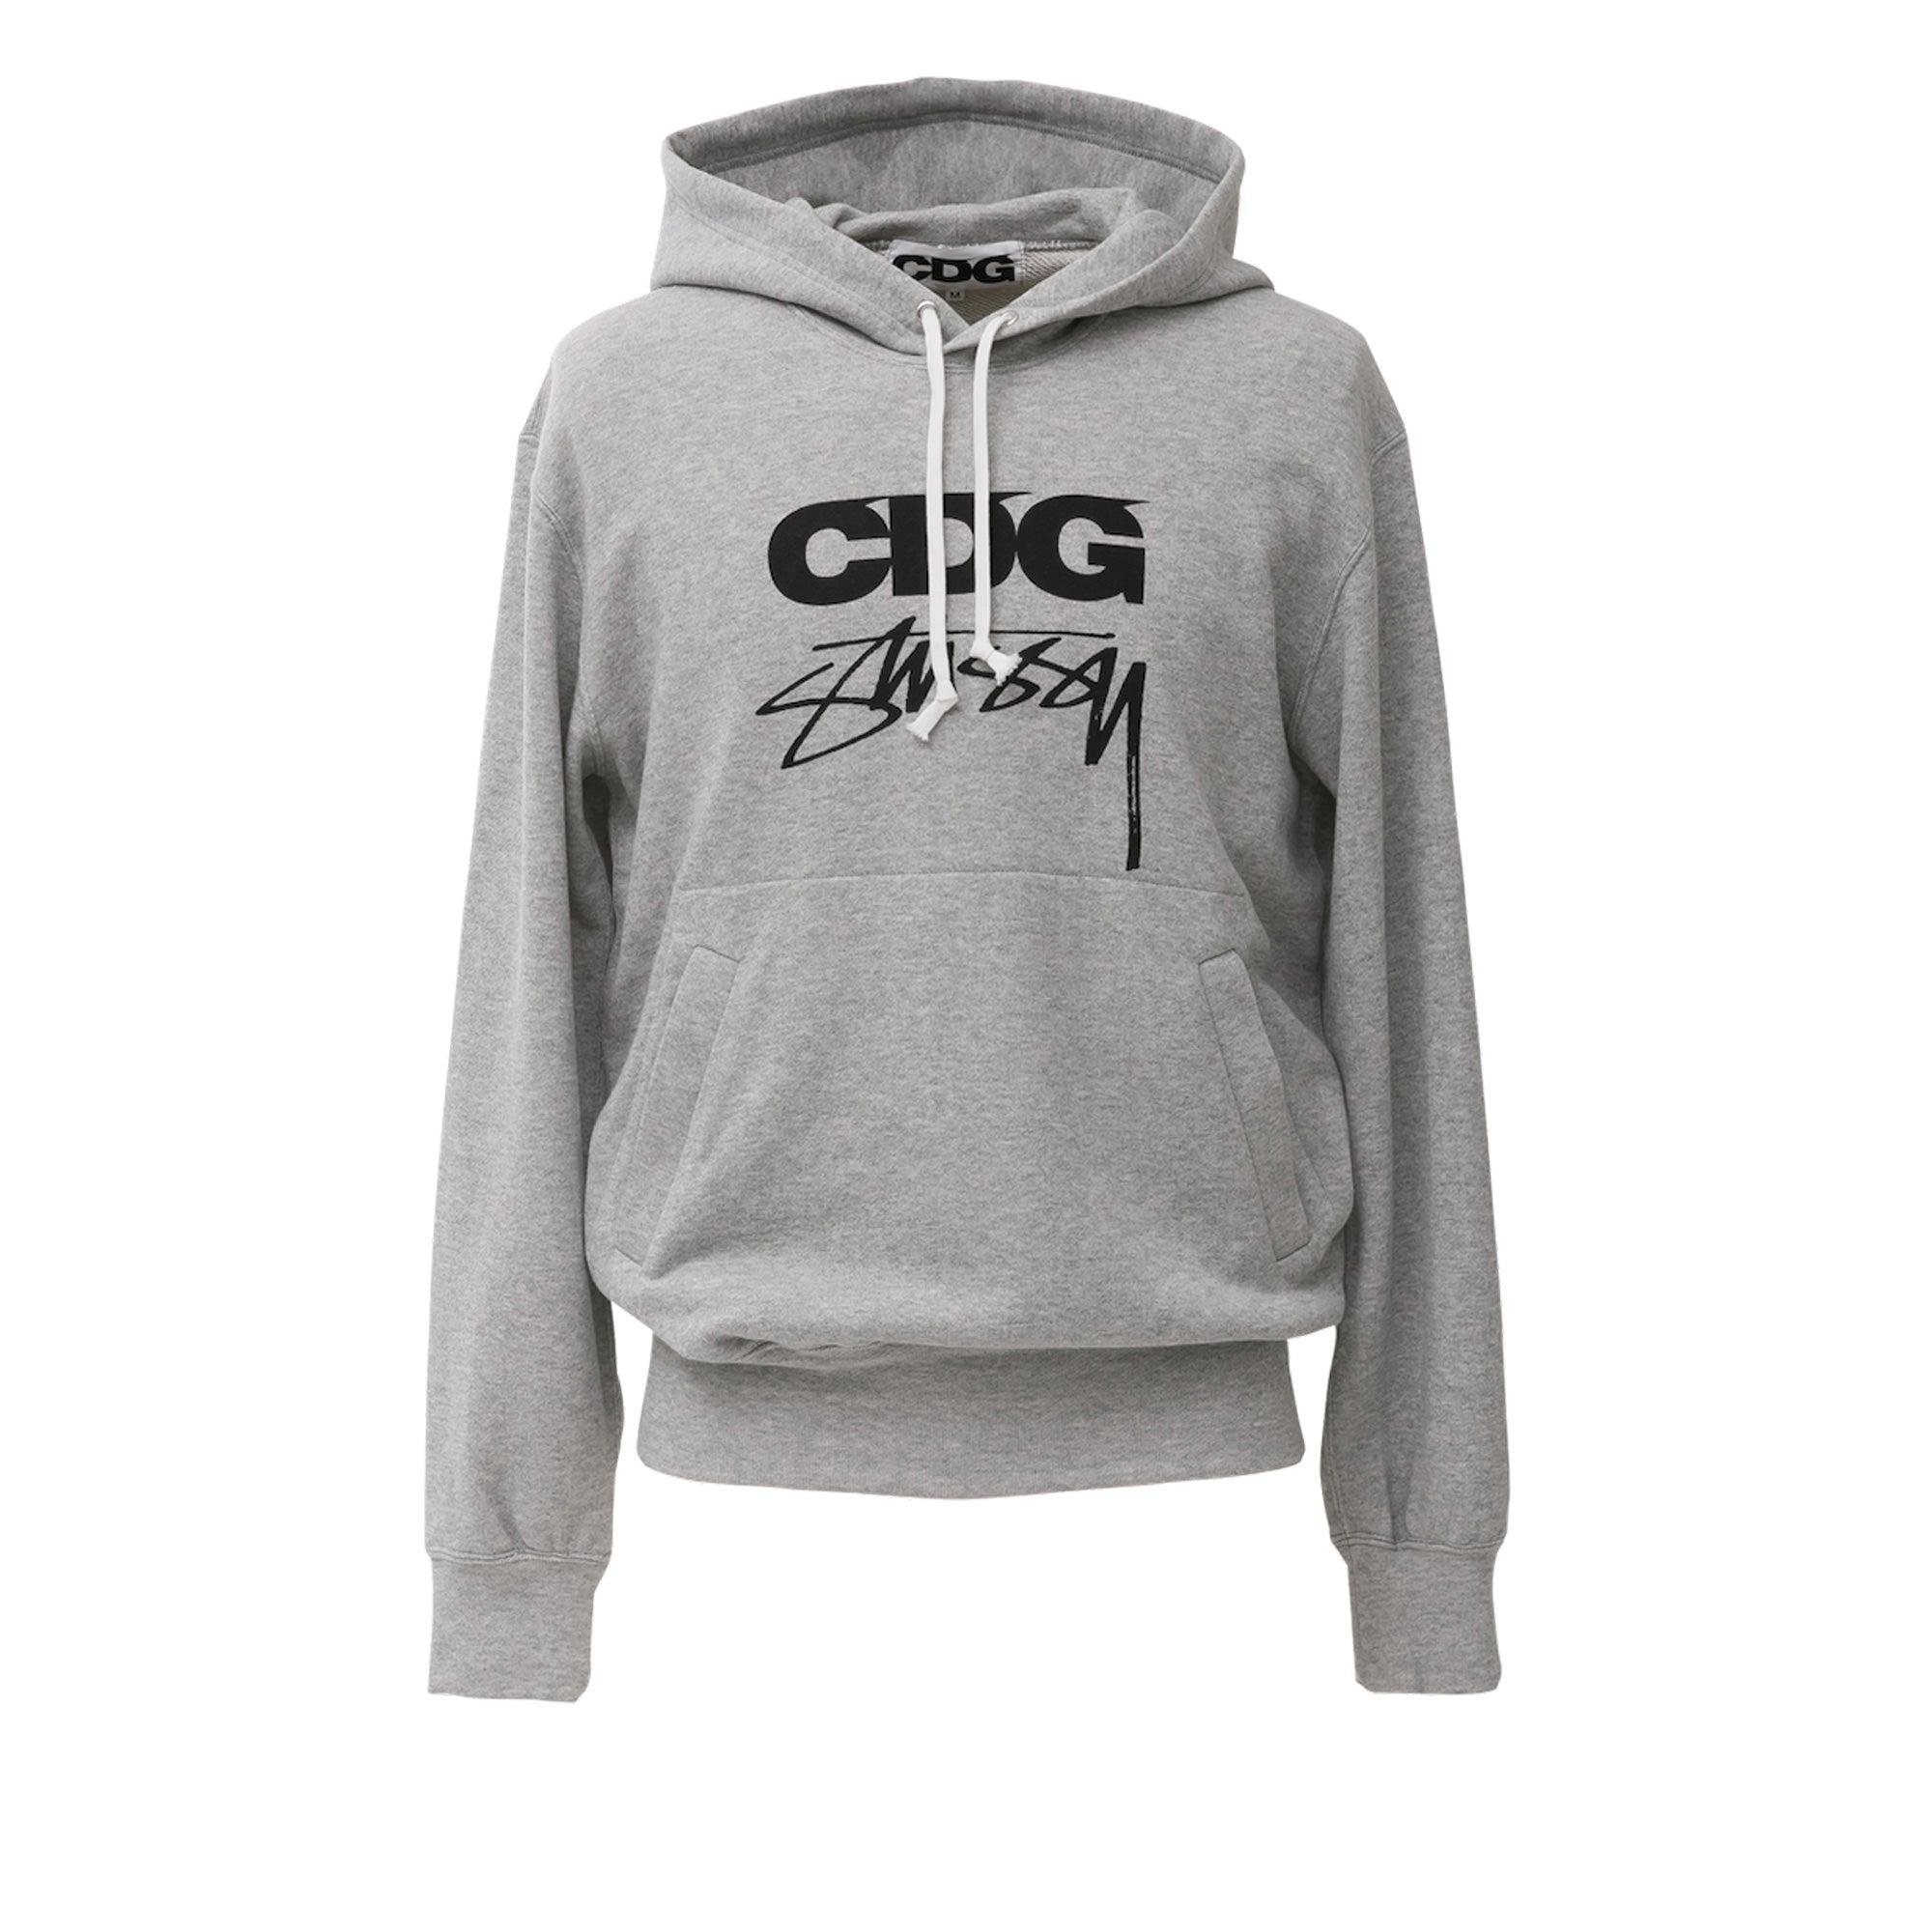 CDG - Stüssy Hoodie - (Gray) by COMME DES GARCONS